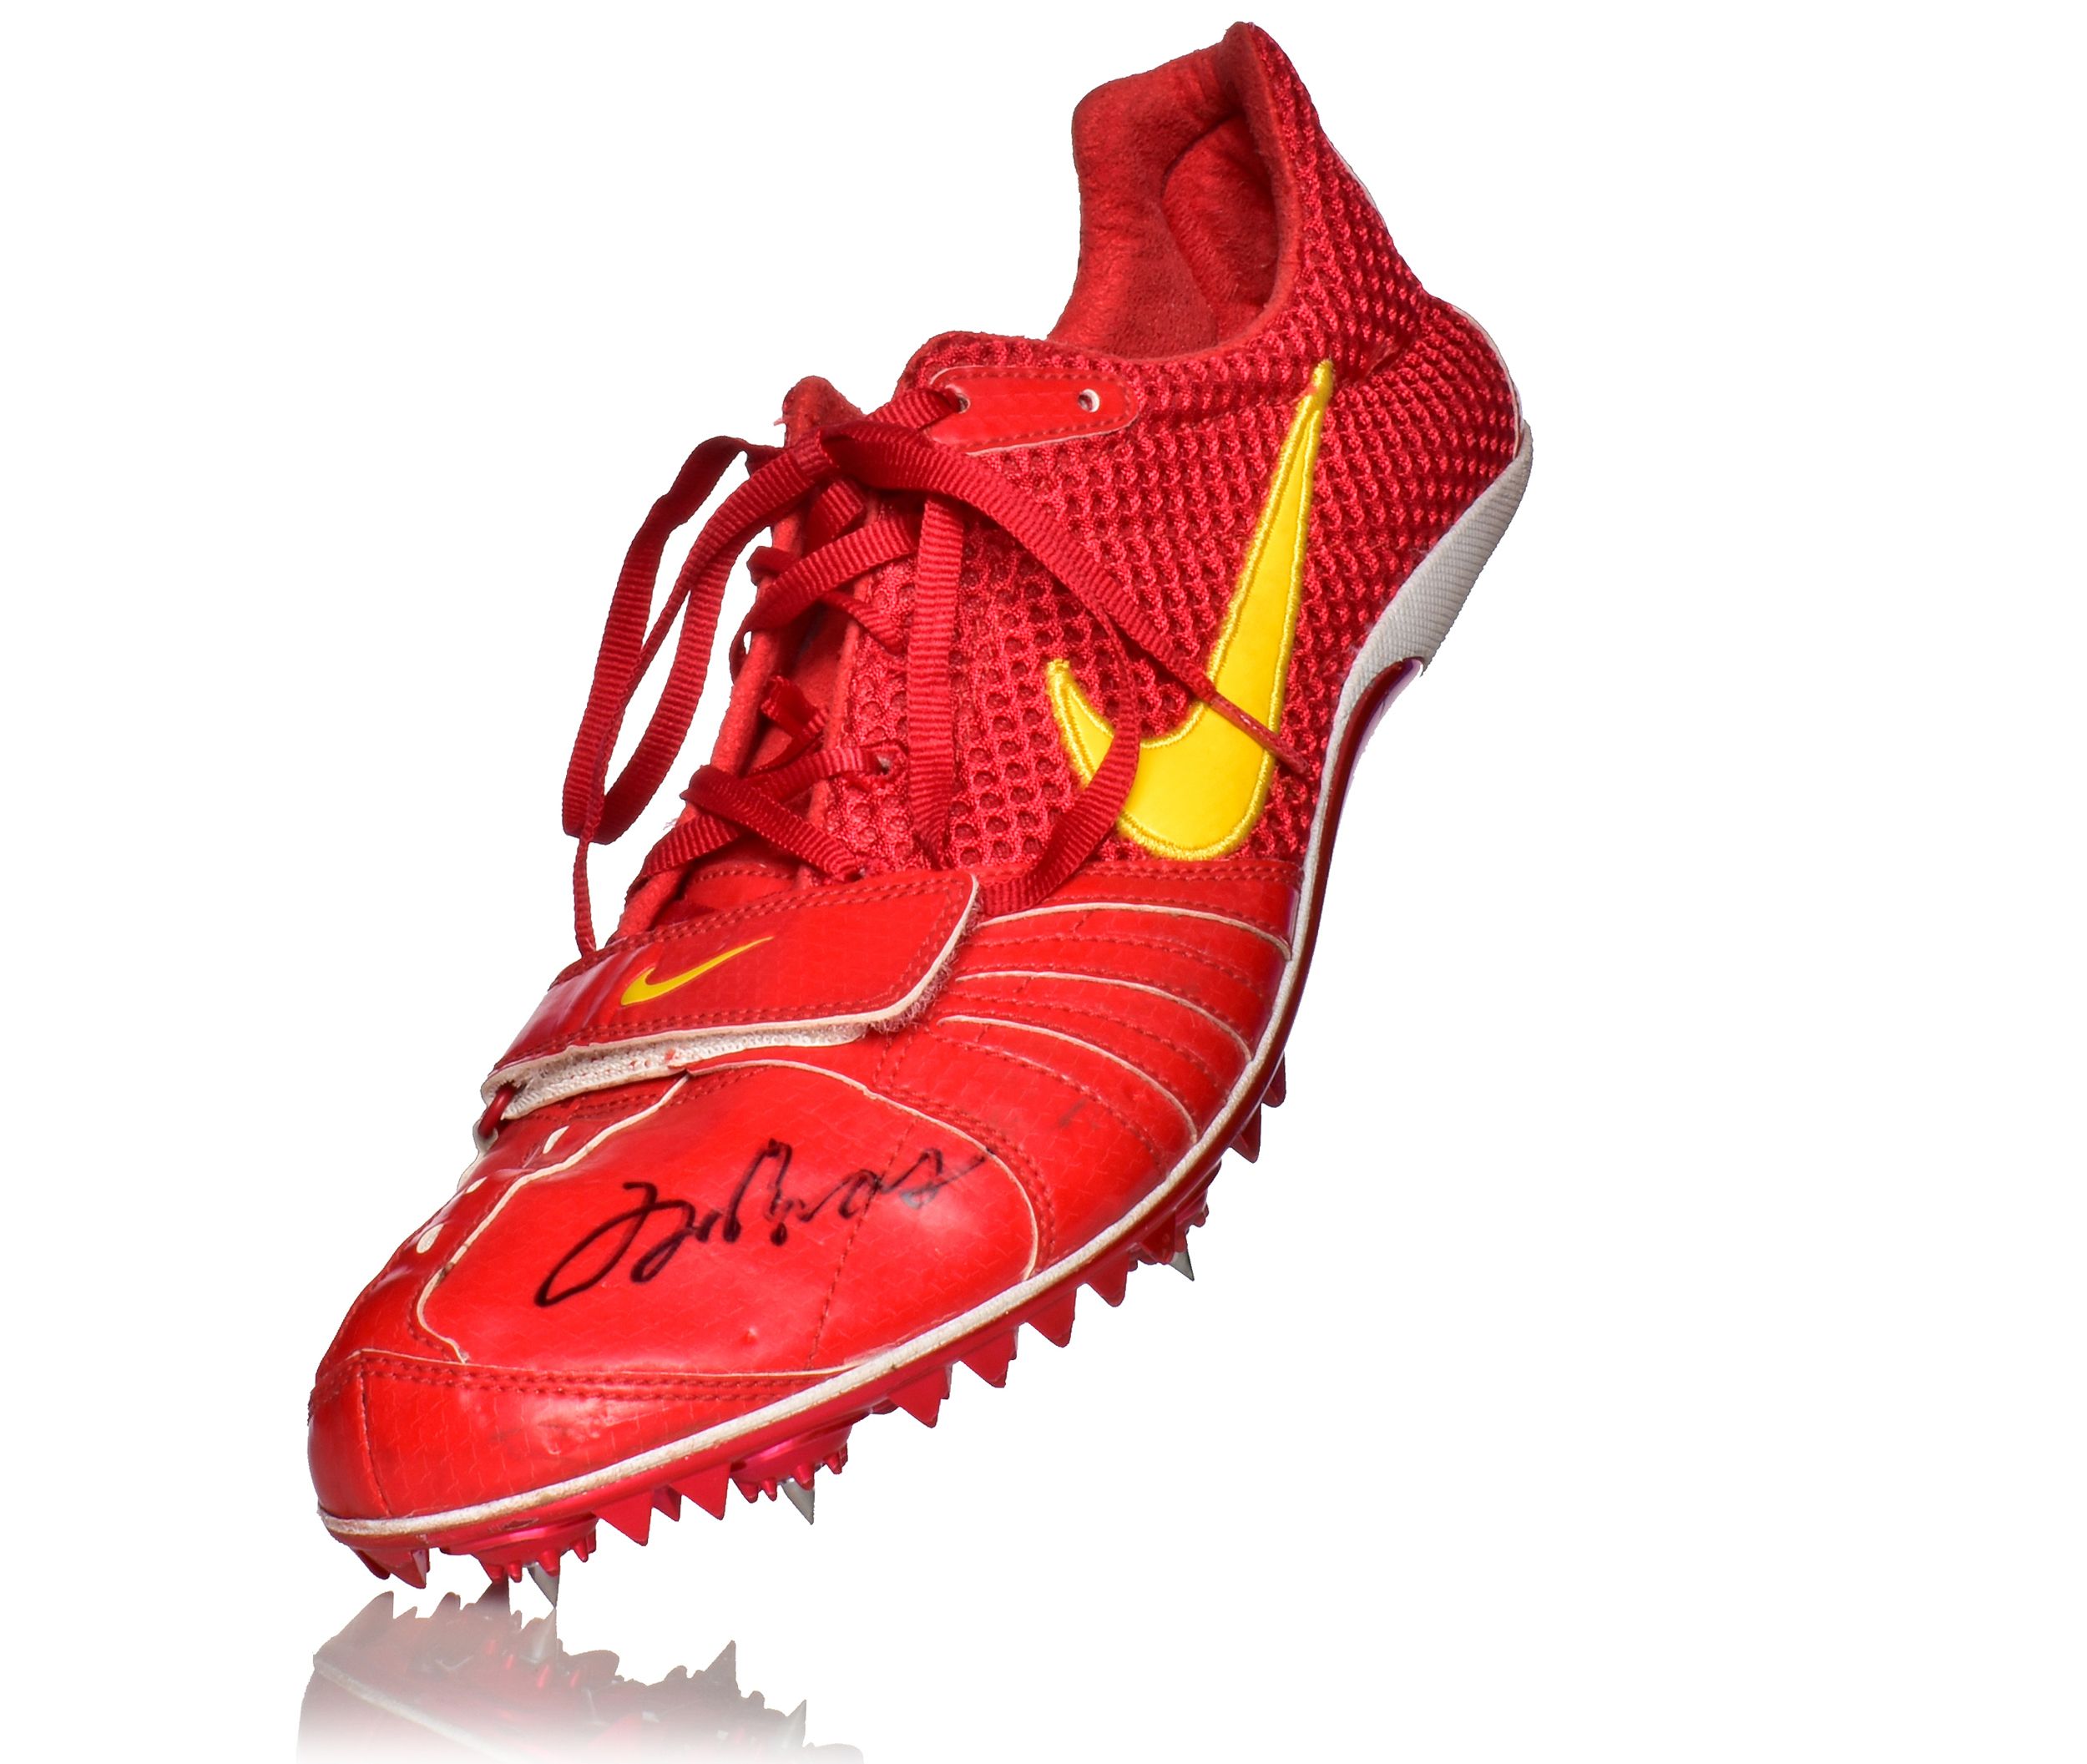 One of the spikes Liu Xiang wore during his world silver medal win in Daegu